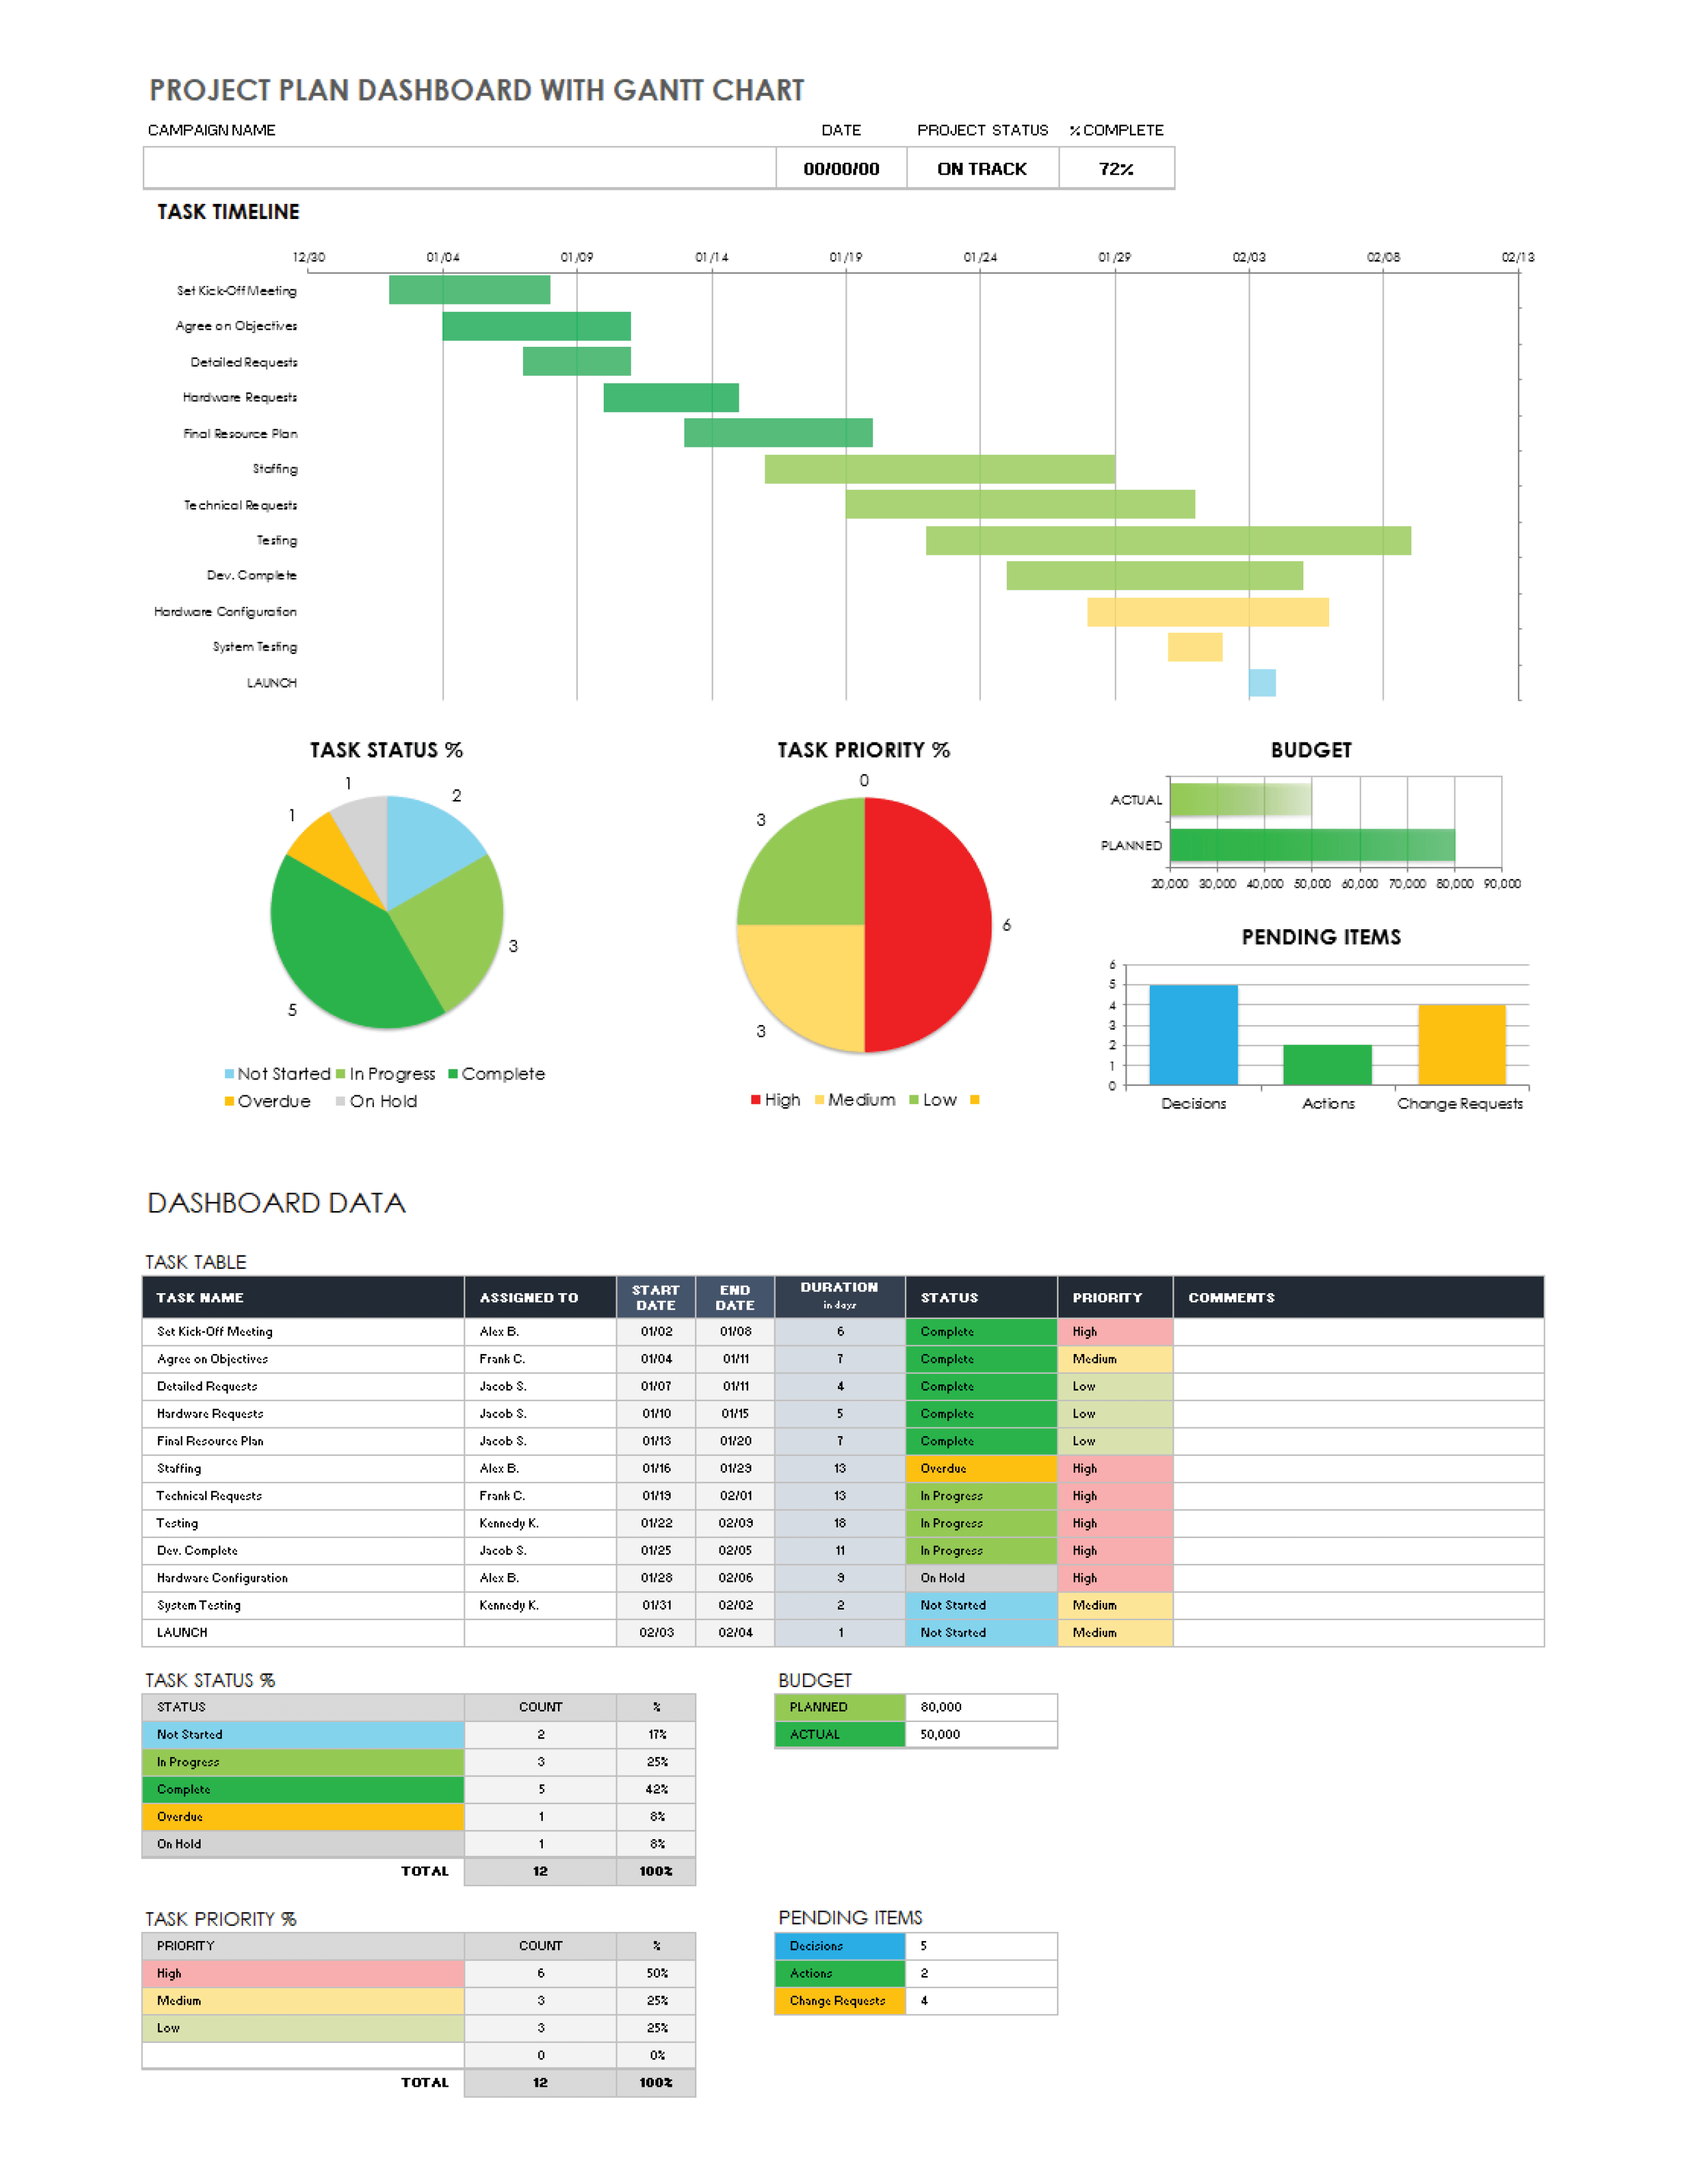 Project Plan Dashboard with Gantt Chart